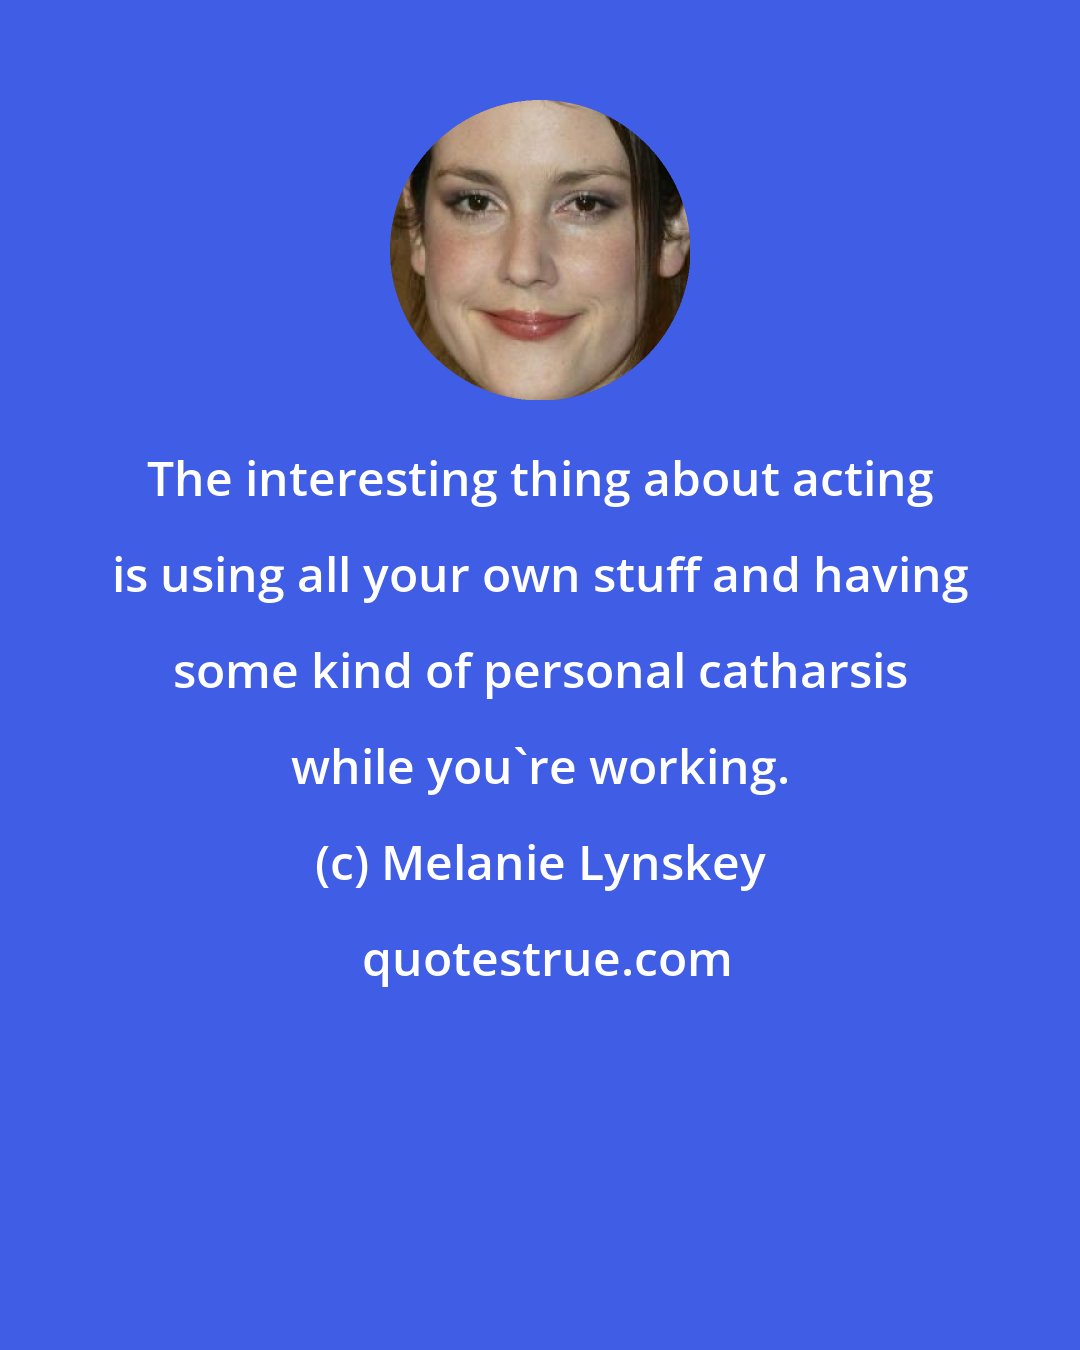 Melanie Lynskey: The interesting thing about acting is using all your own stuff and having some kind of personal catharsis while you're working.